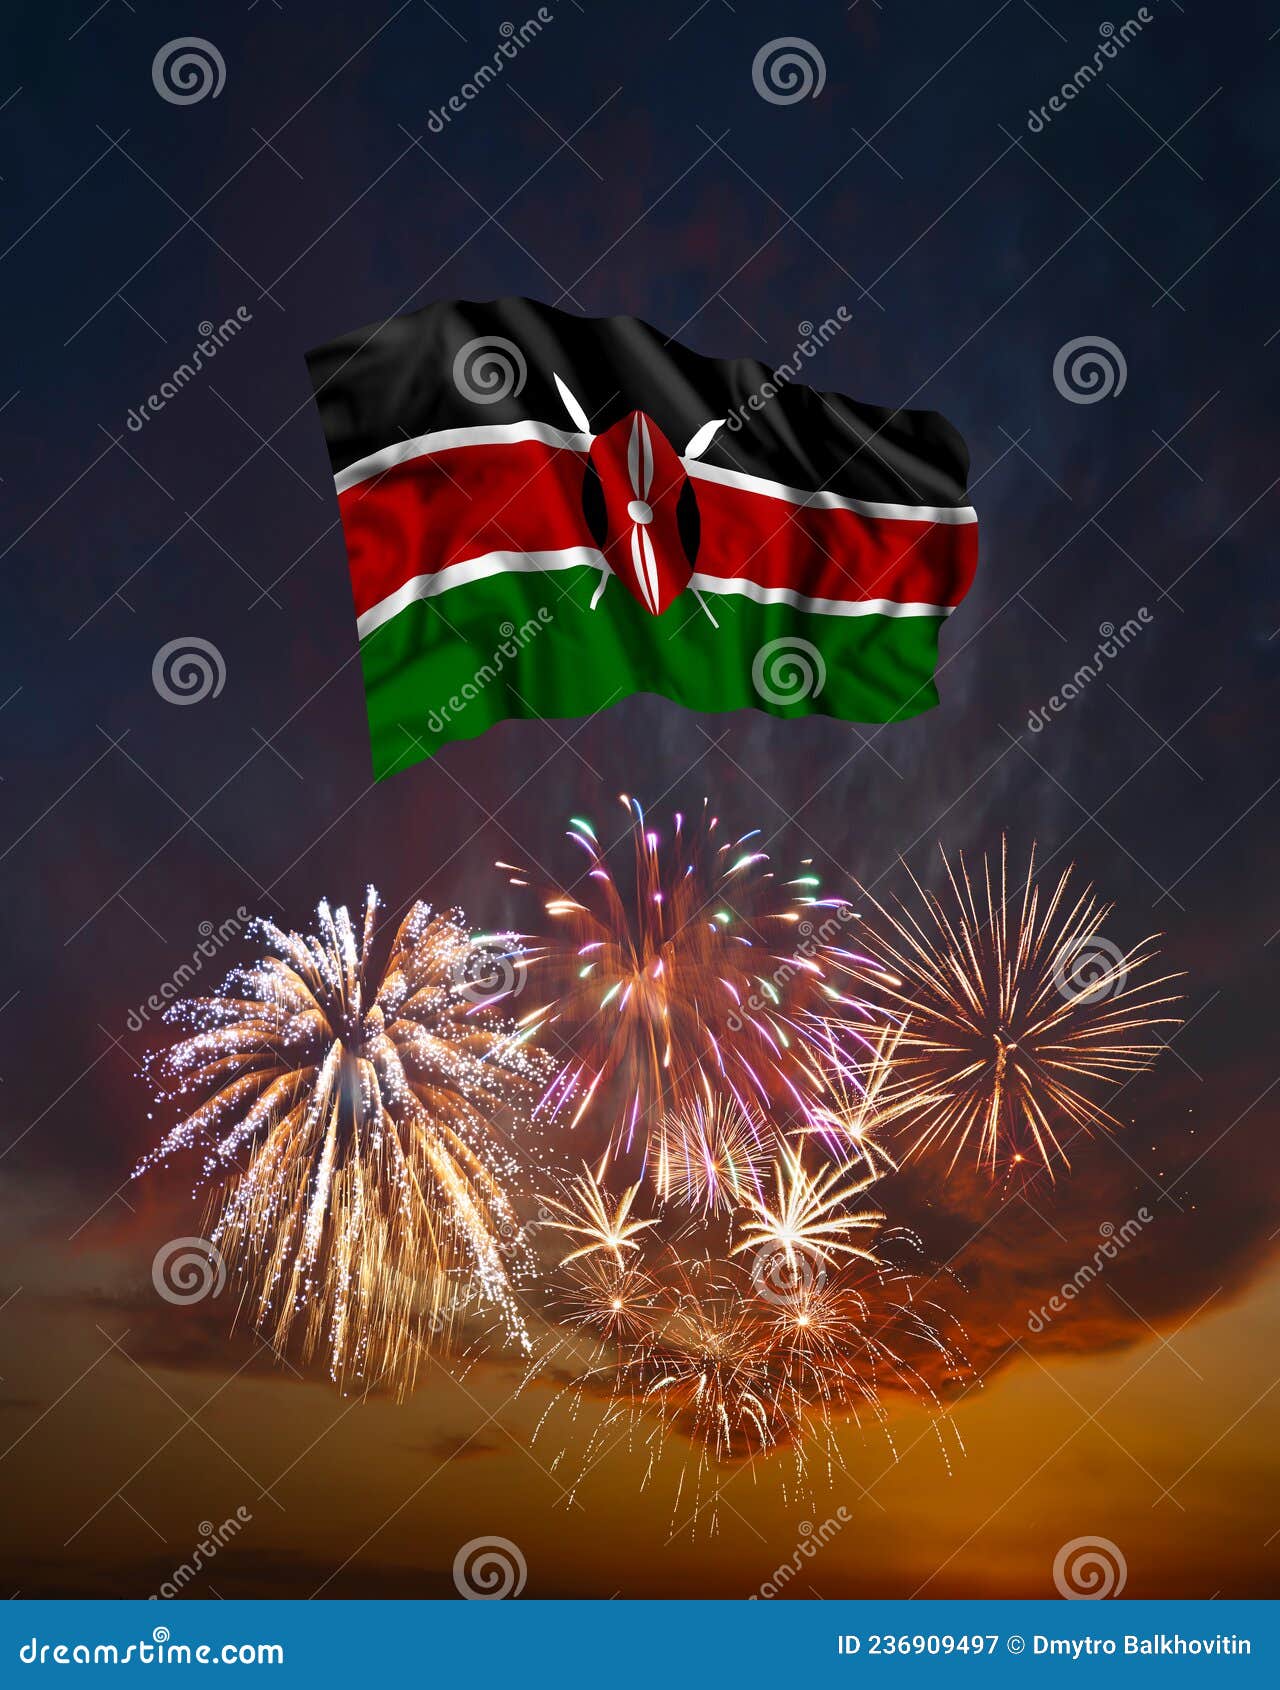 Holiday Fireworks And Flag Of Kenya Stock Image Image Of Anniversary